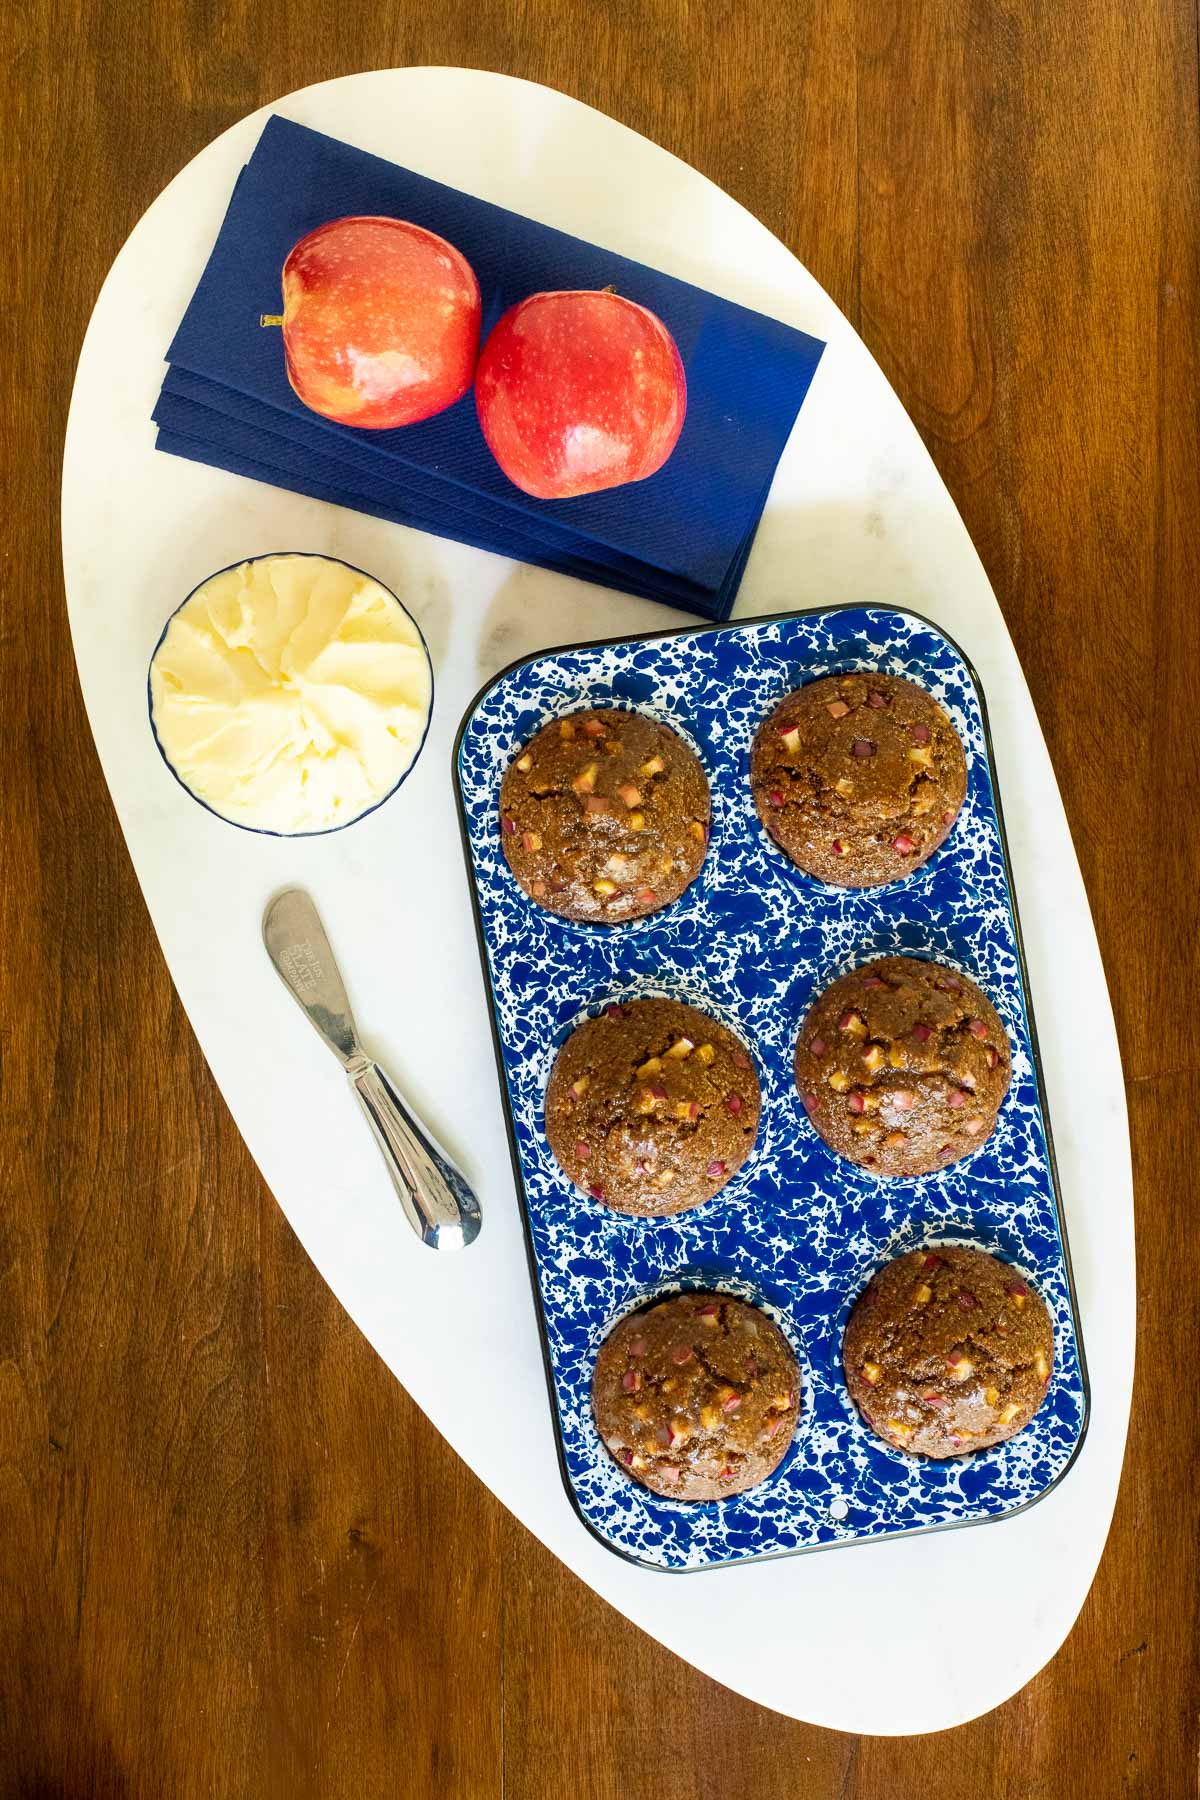 Vertical overhead photo of Honey Glazed Apple Bran Muffins in a blue and white porcelain muffin pan.